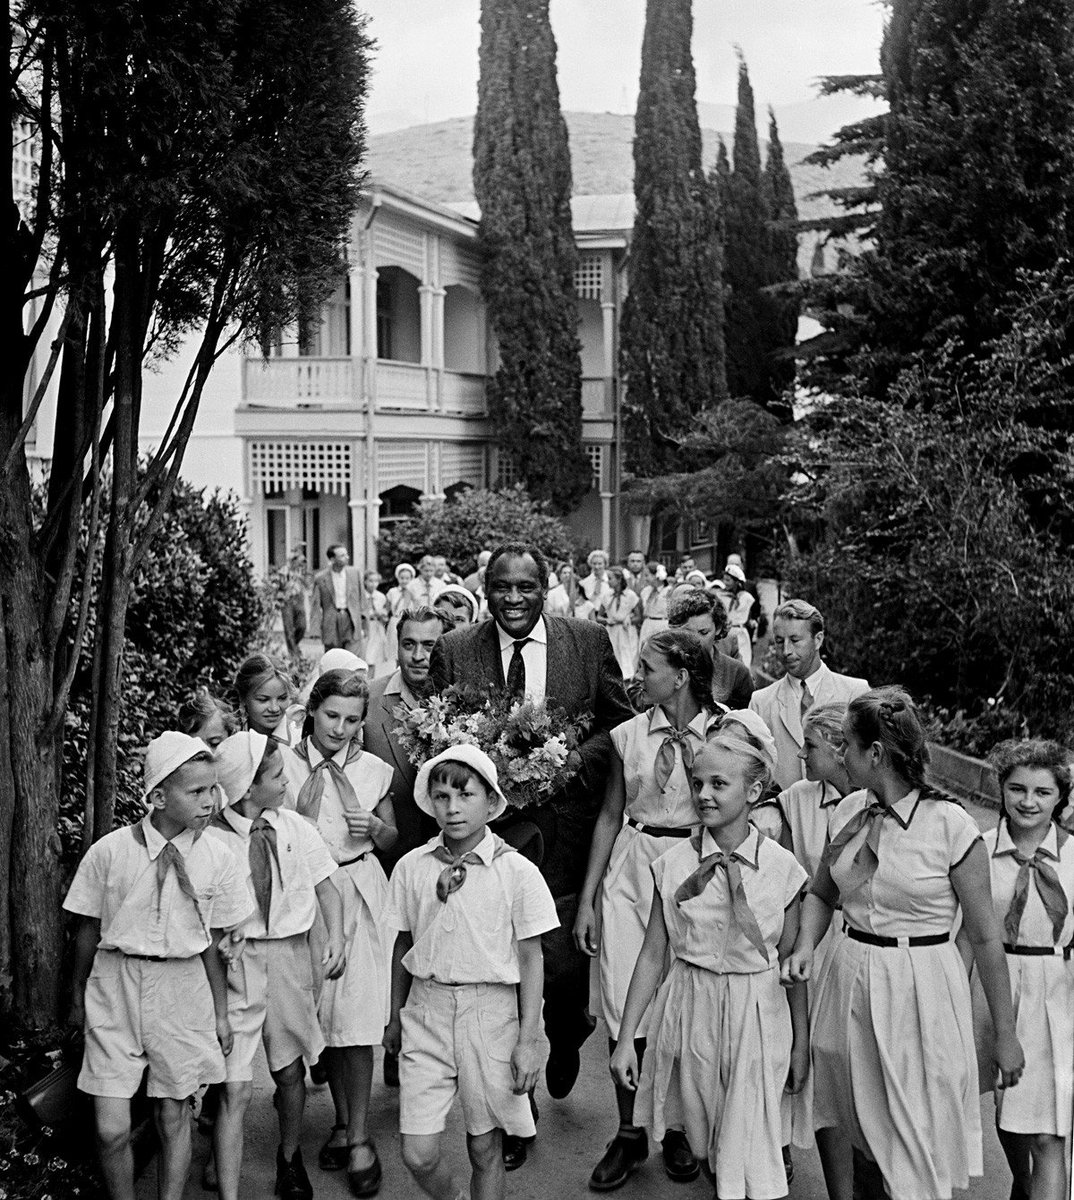 In honor of his birthday:
American actor, singer and Lenin Peace Prize prize winner Paul Robeson at the Artek International Children’s Centre, USSR 1958